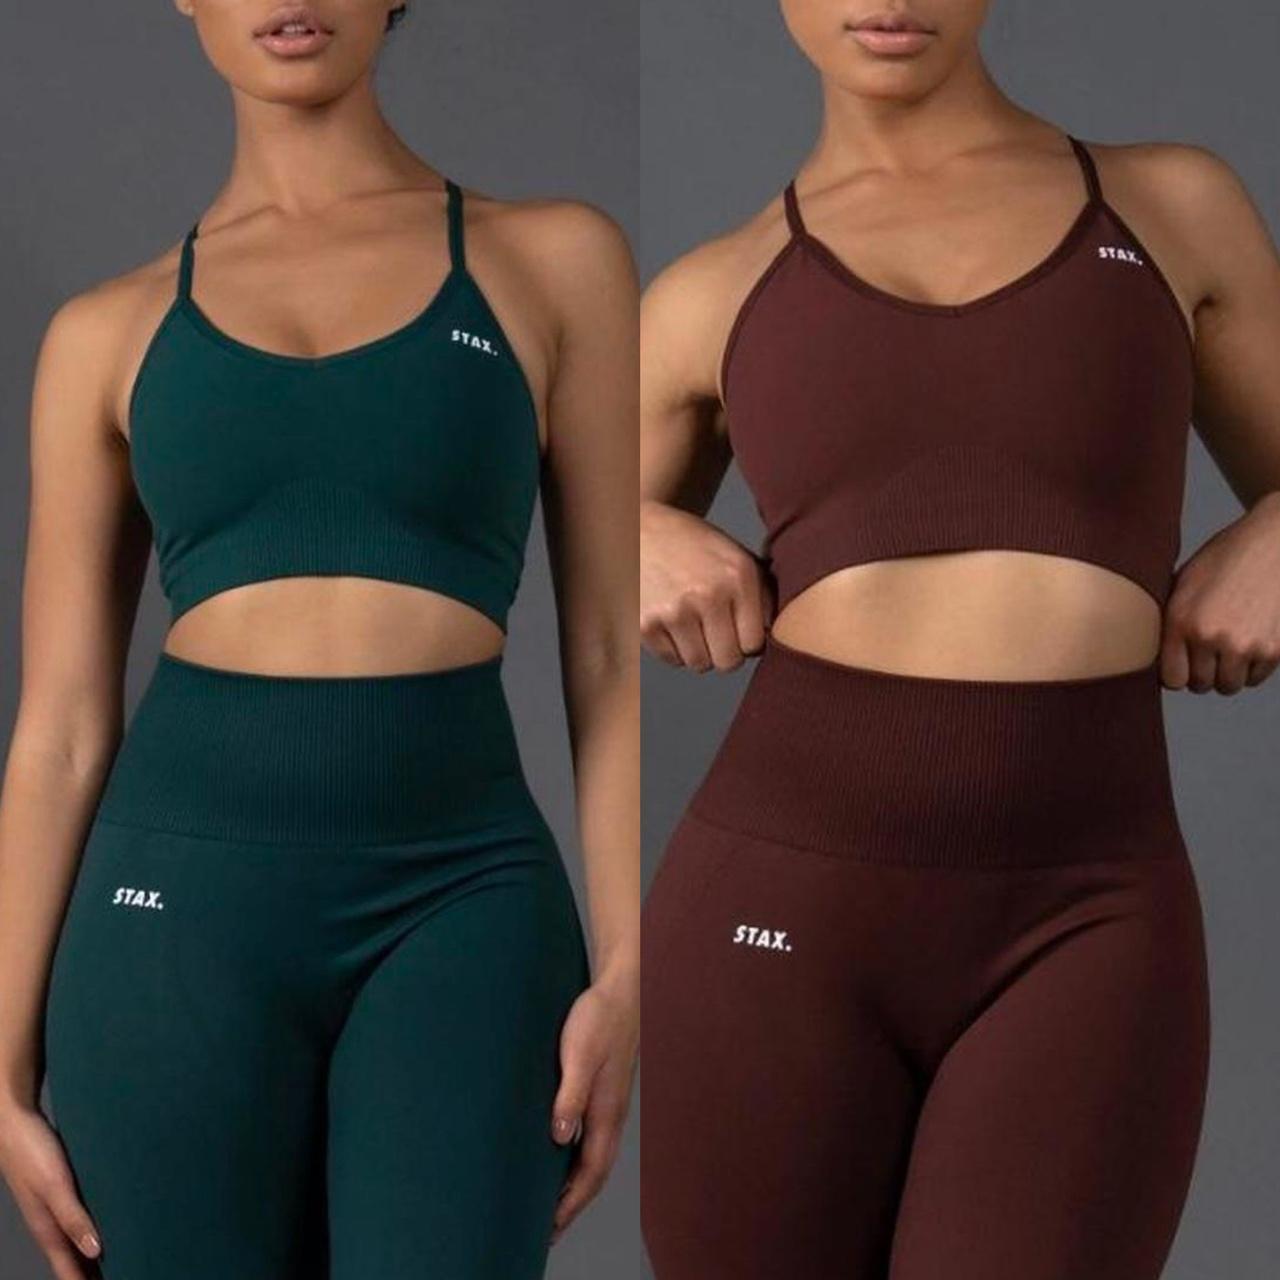 2x Stax Sports Bras -One green, one brown -The Brown - Depop